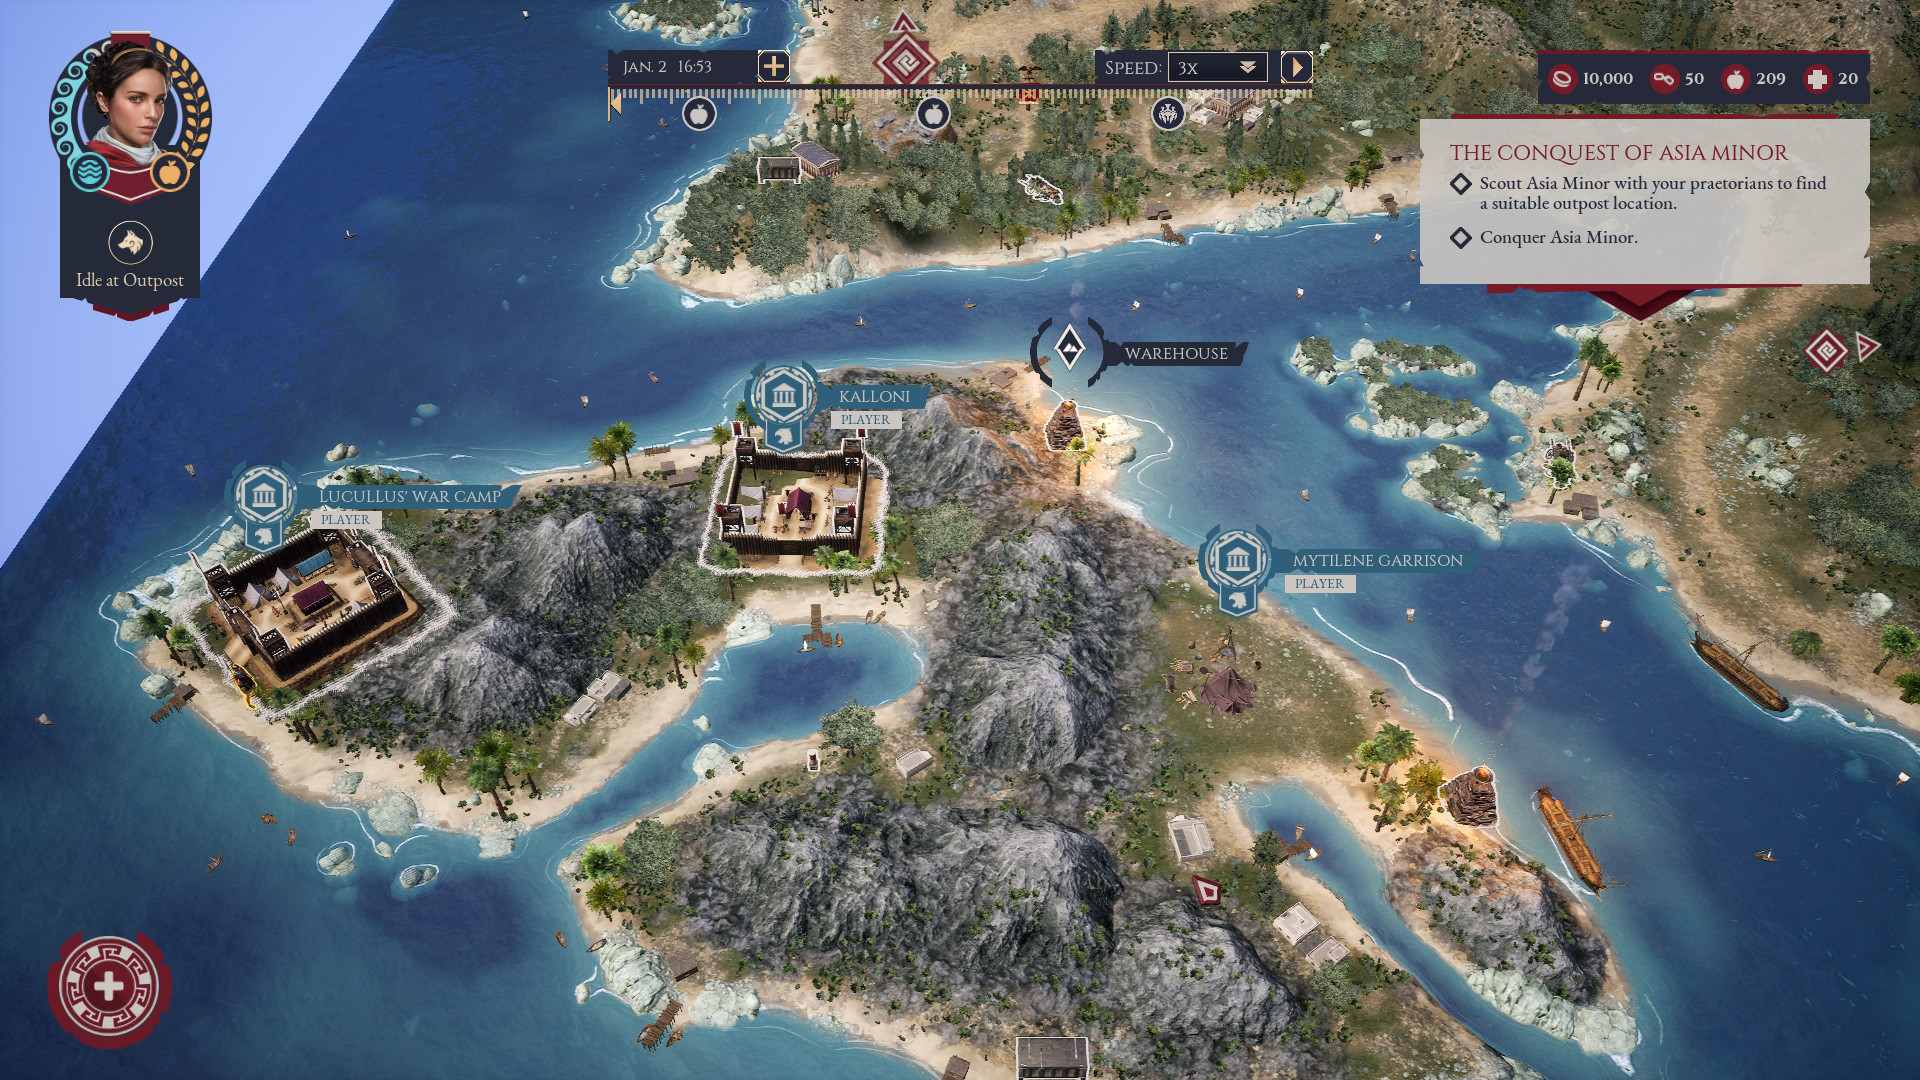 Expeditions: Rome Free Download